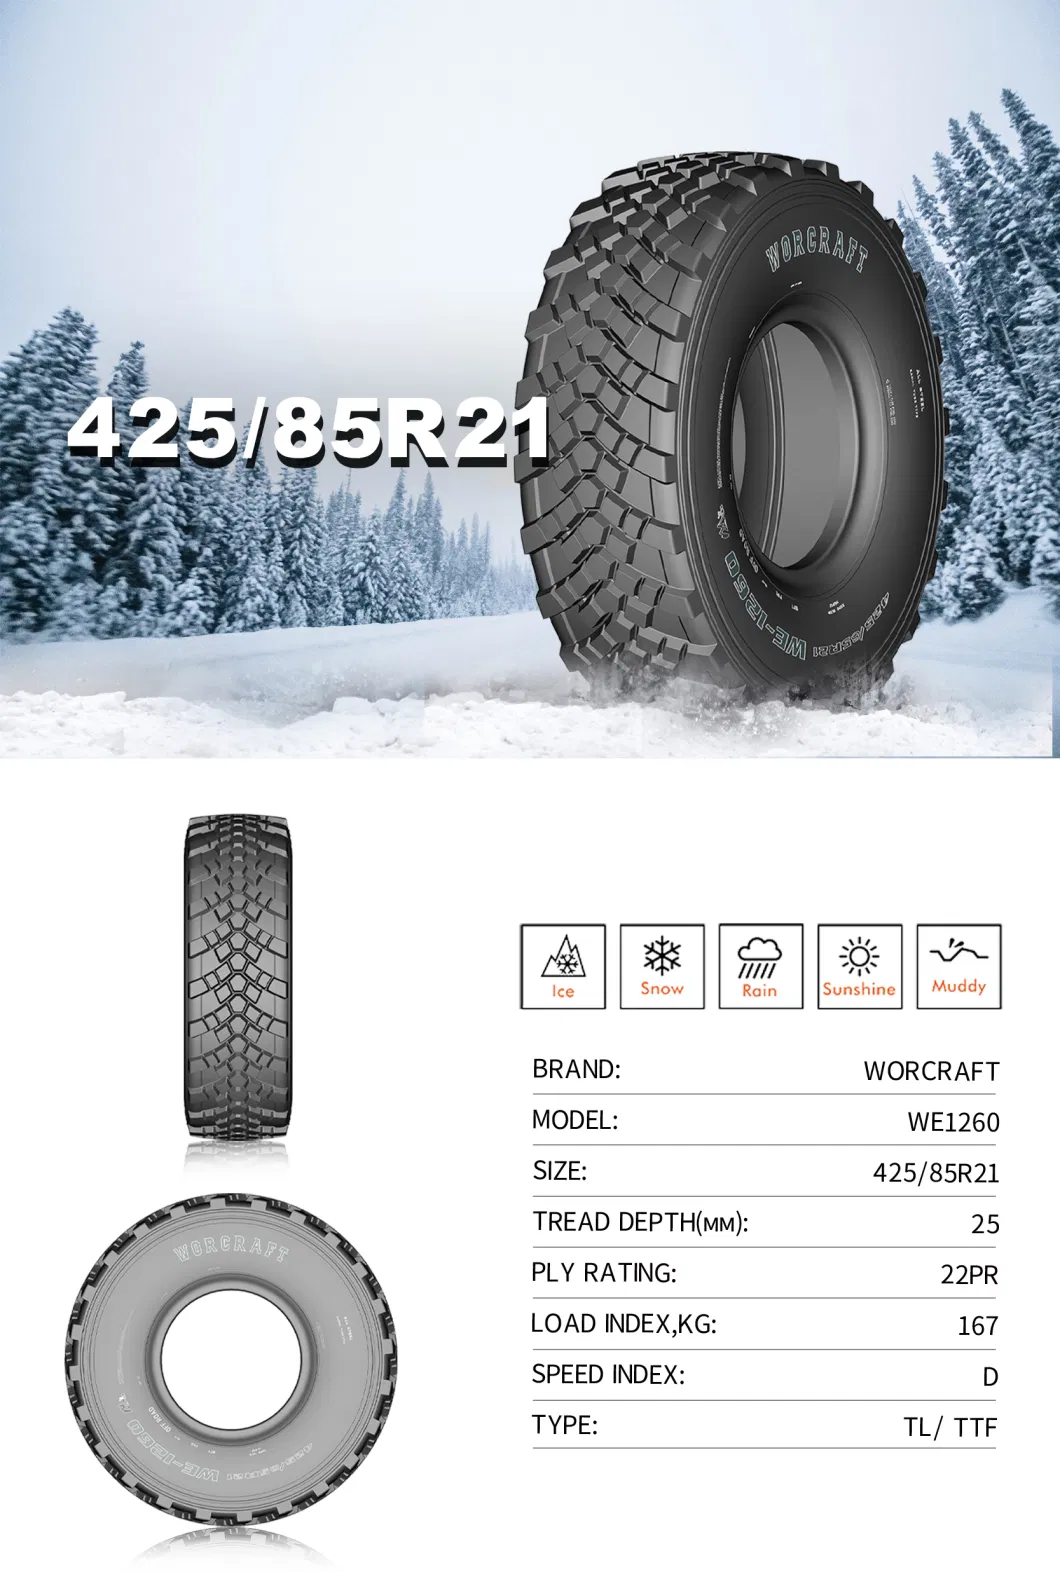 Worcraft Brand Double Coin Kama Tyre 425/85r21 1600r20 for Russian Market